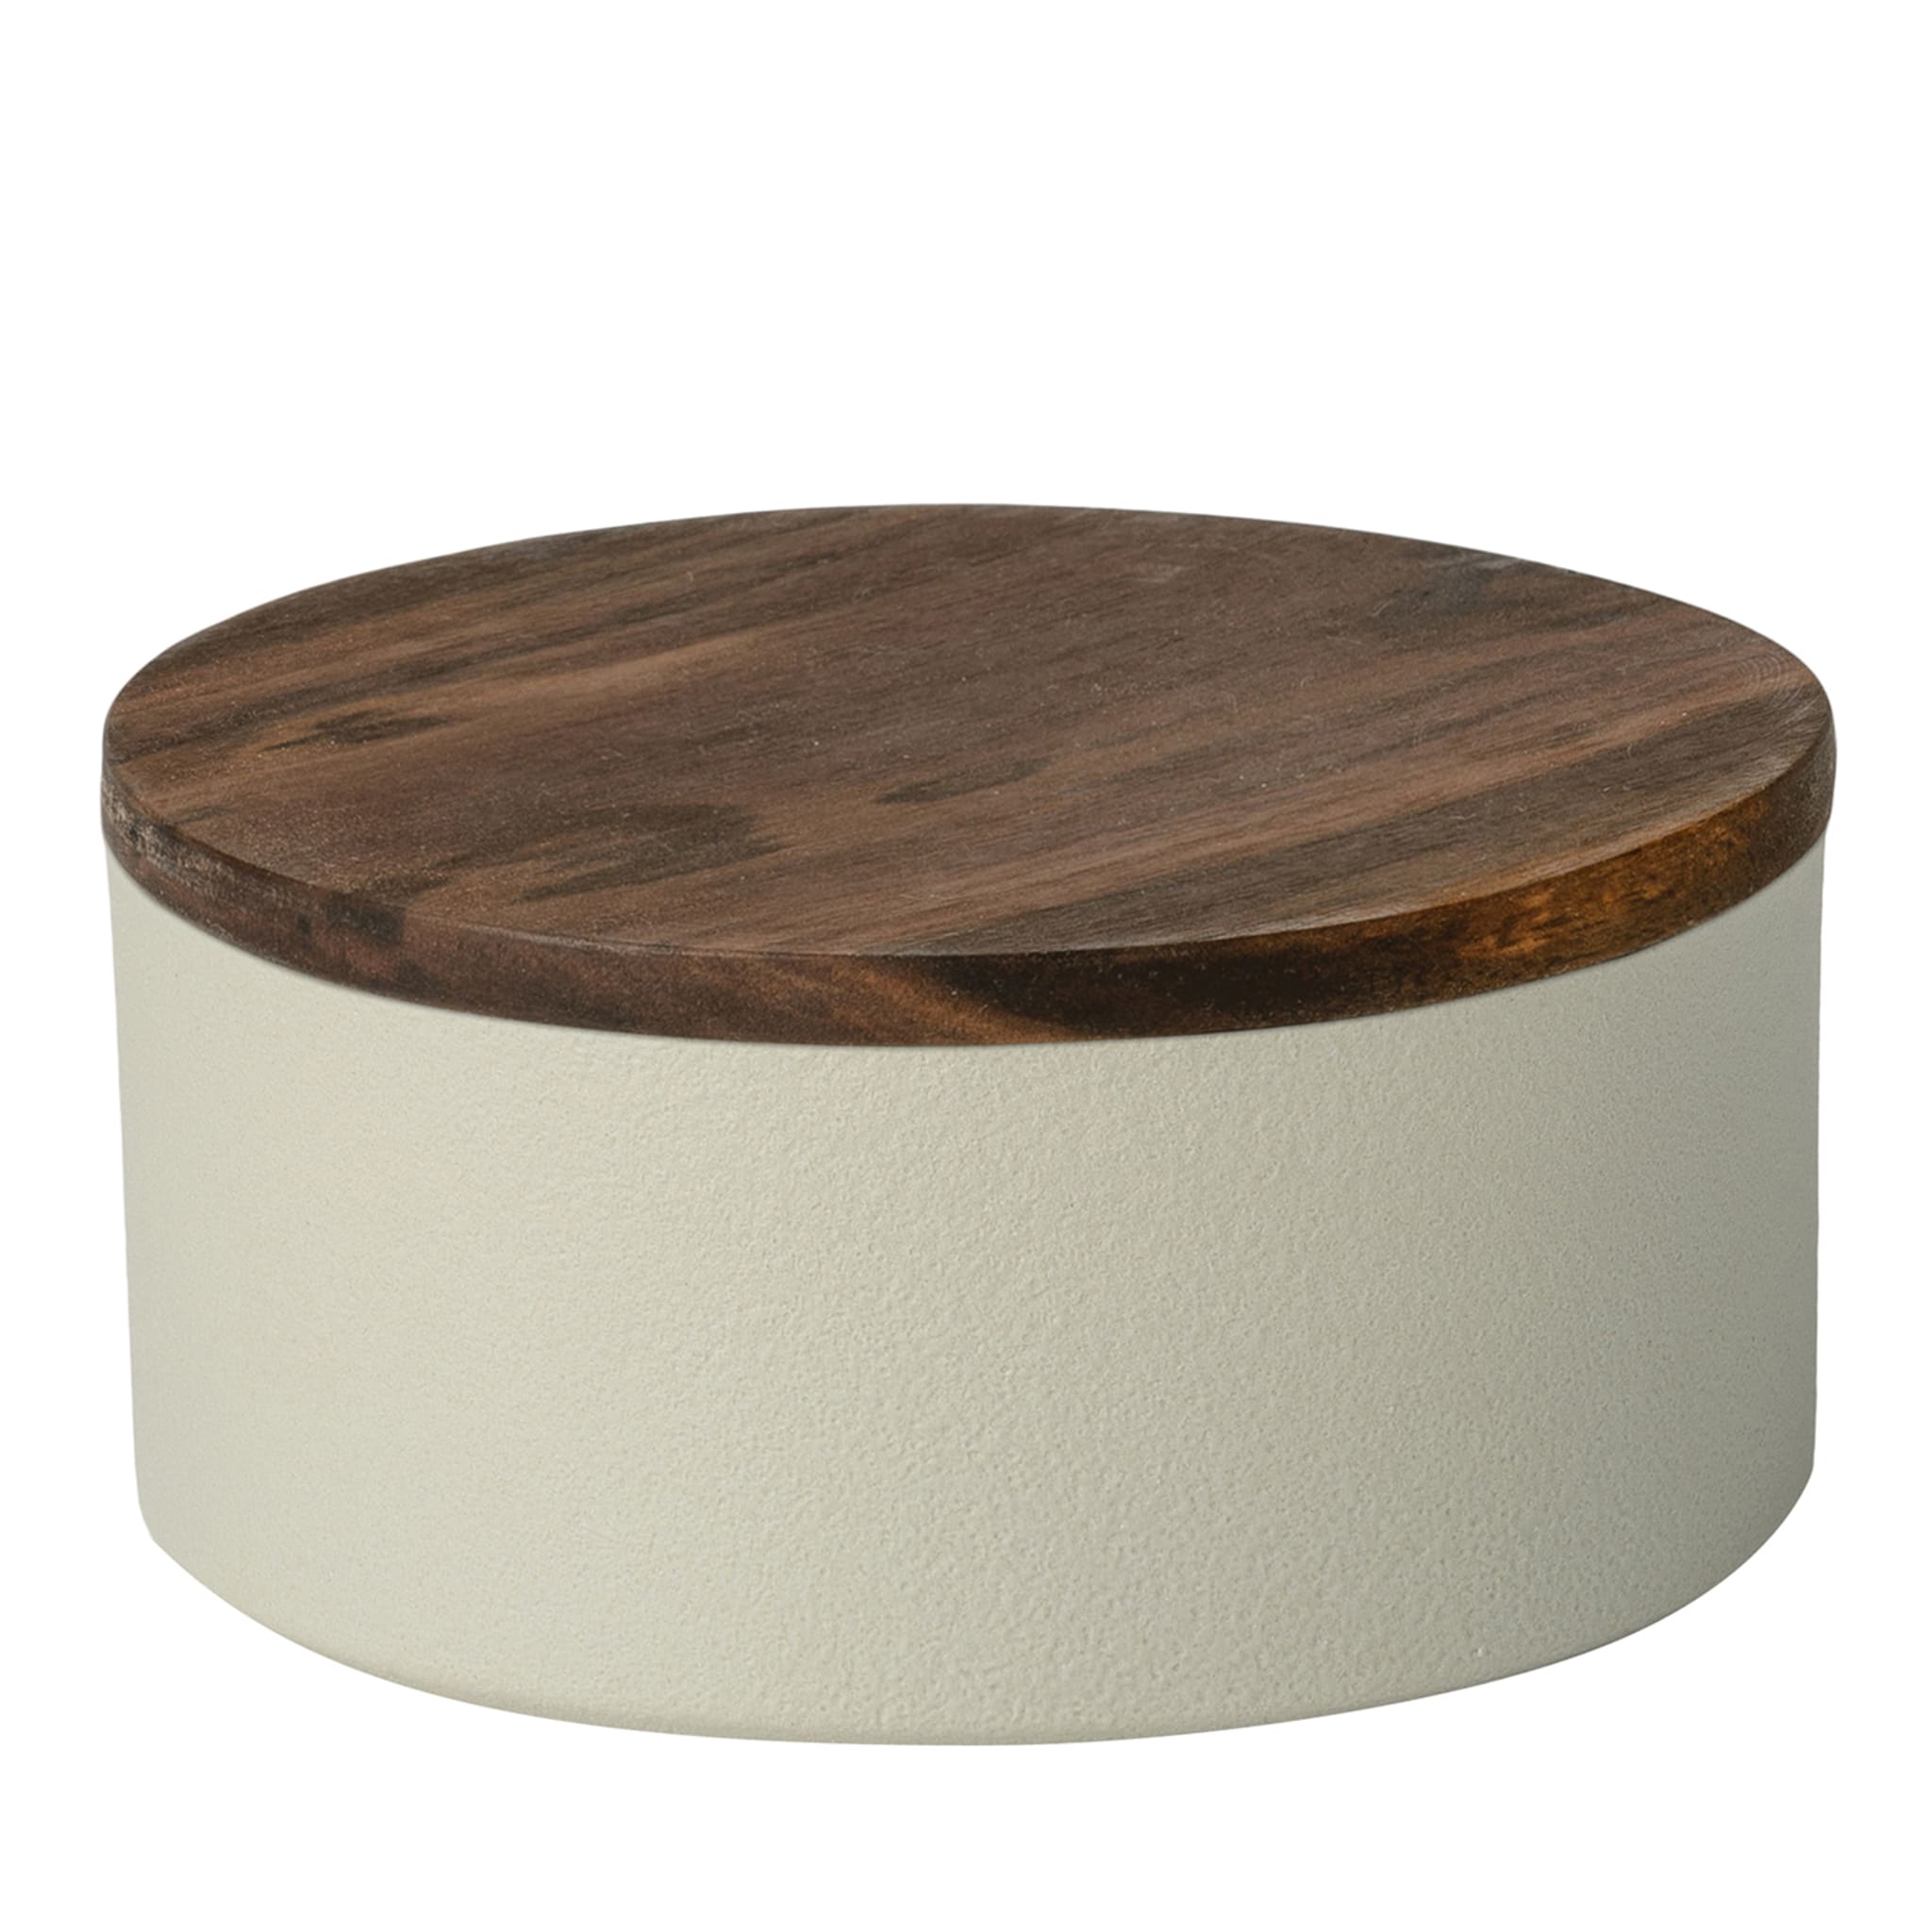 Small Round Ceramic Container with Wooden Lid - Main view